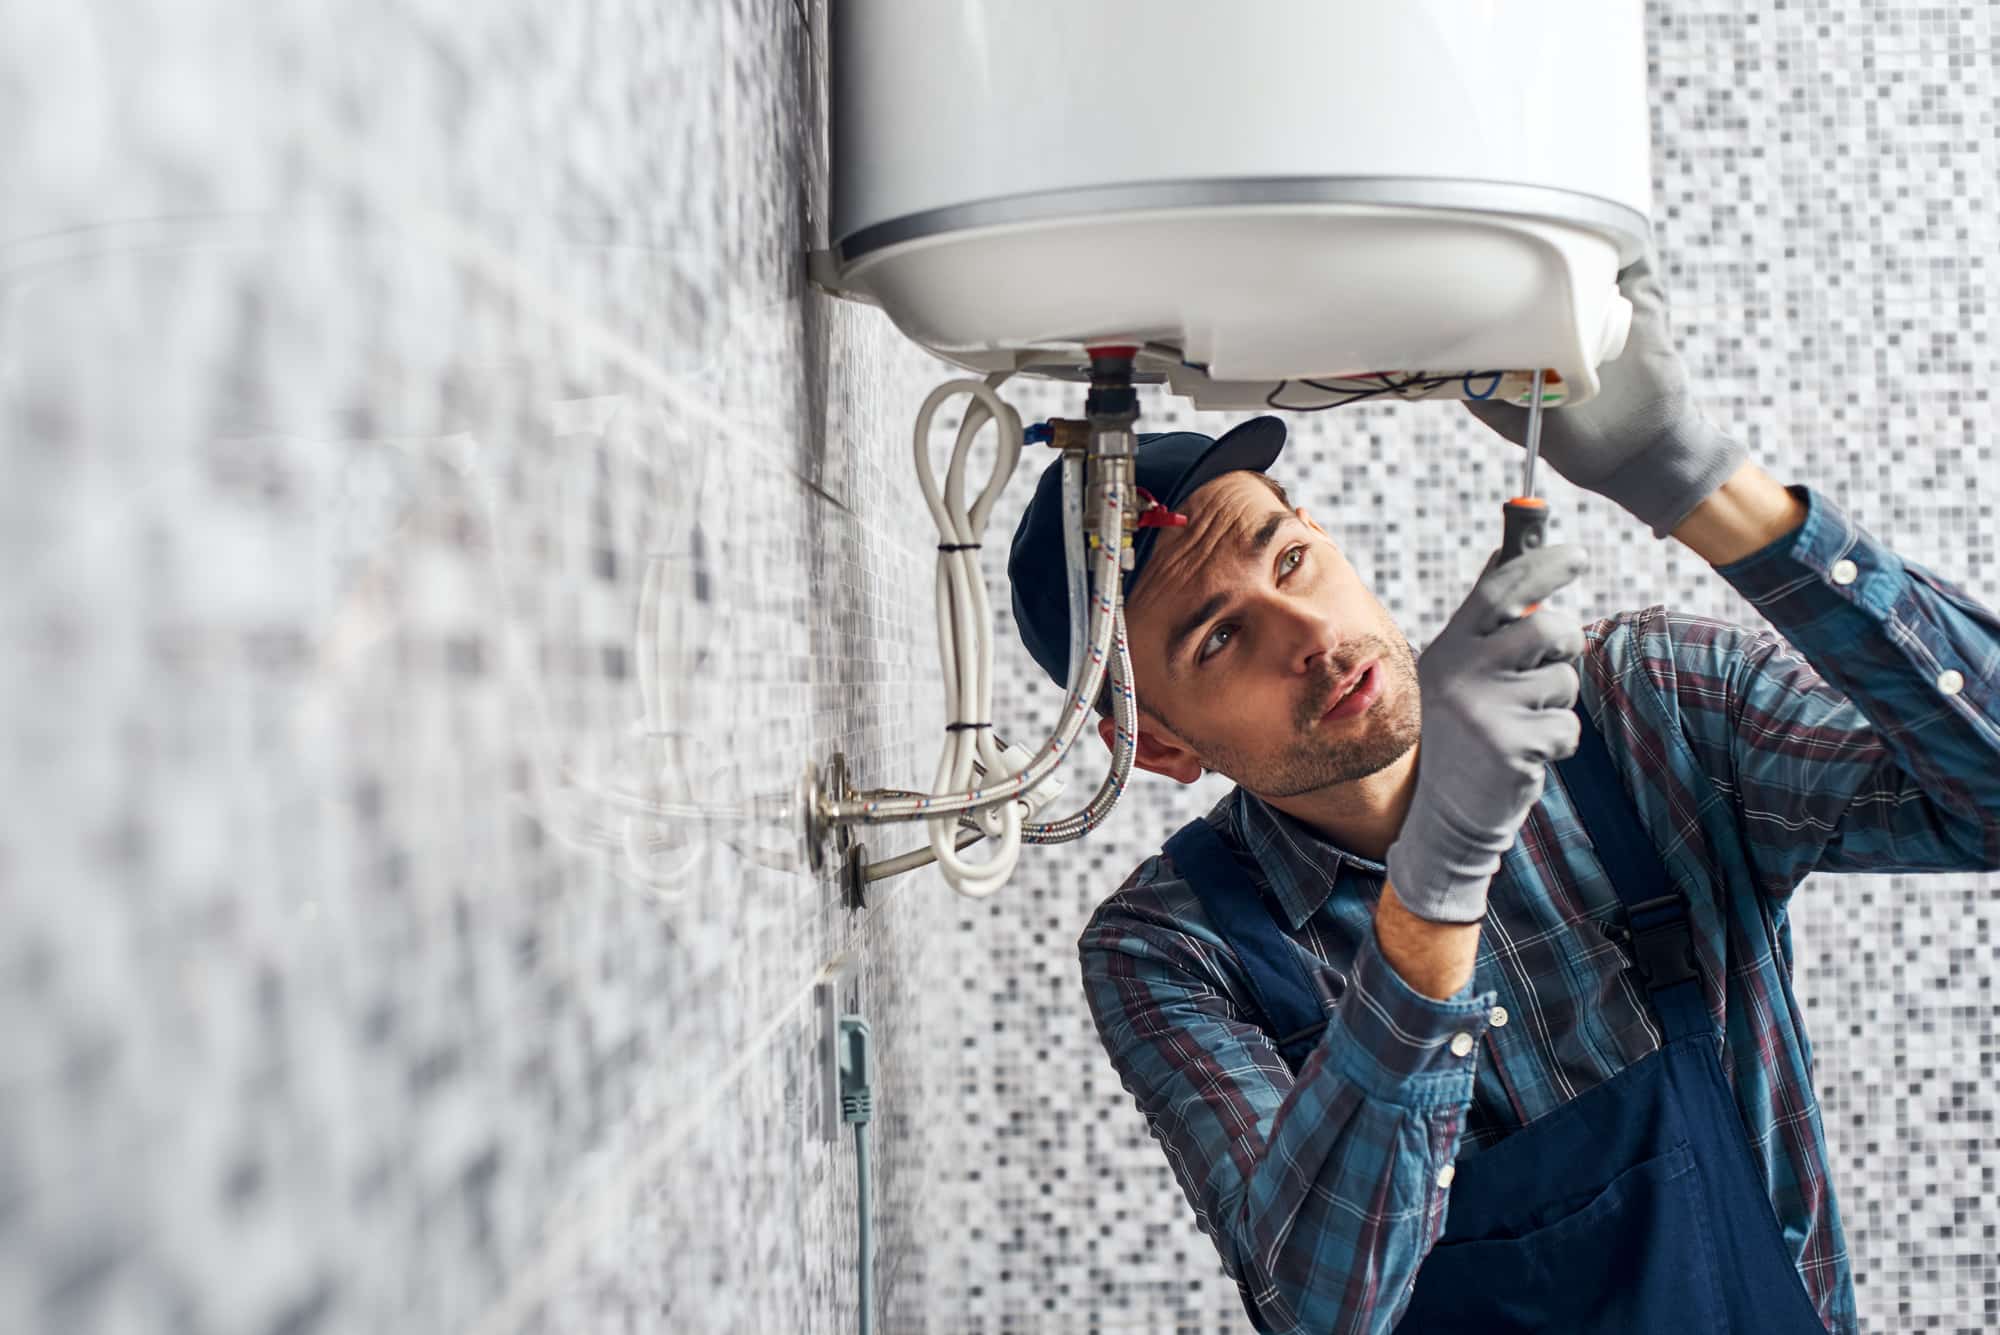 Water Heater Repair Company Gives 7 Tips When Tackling Water Heater Repairs